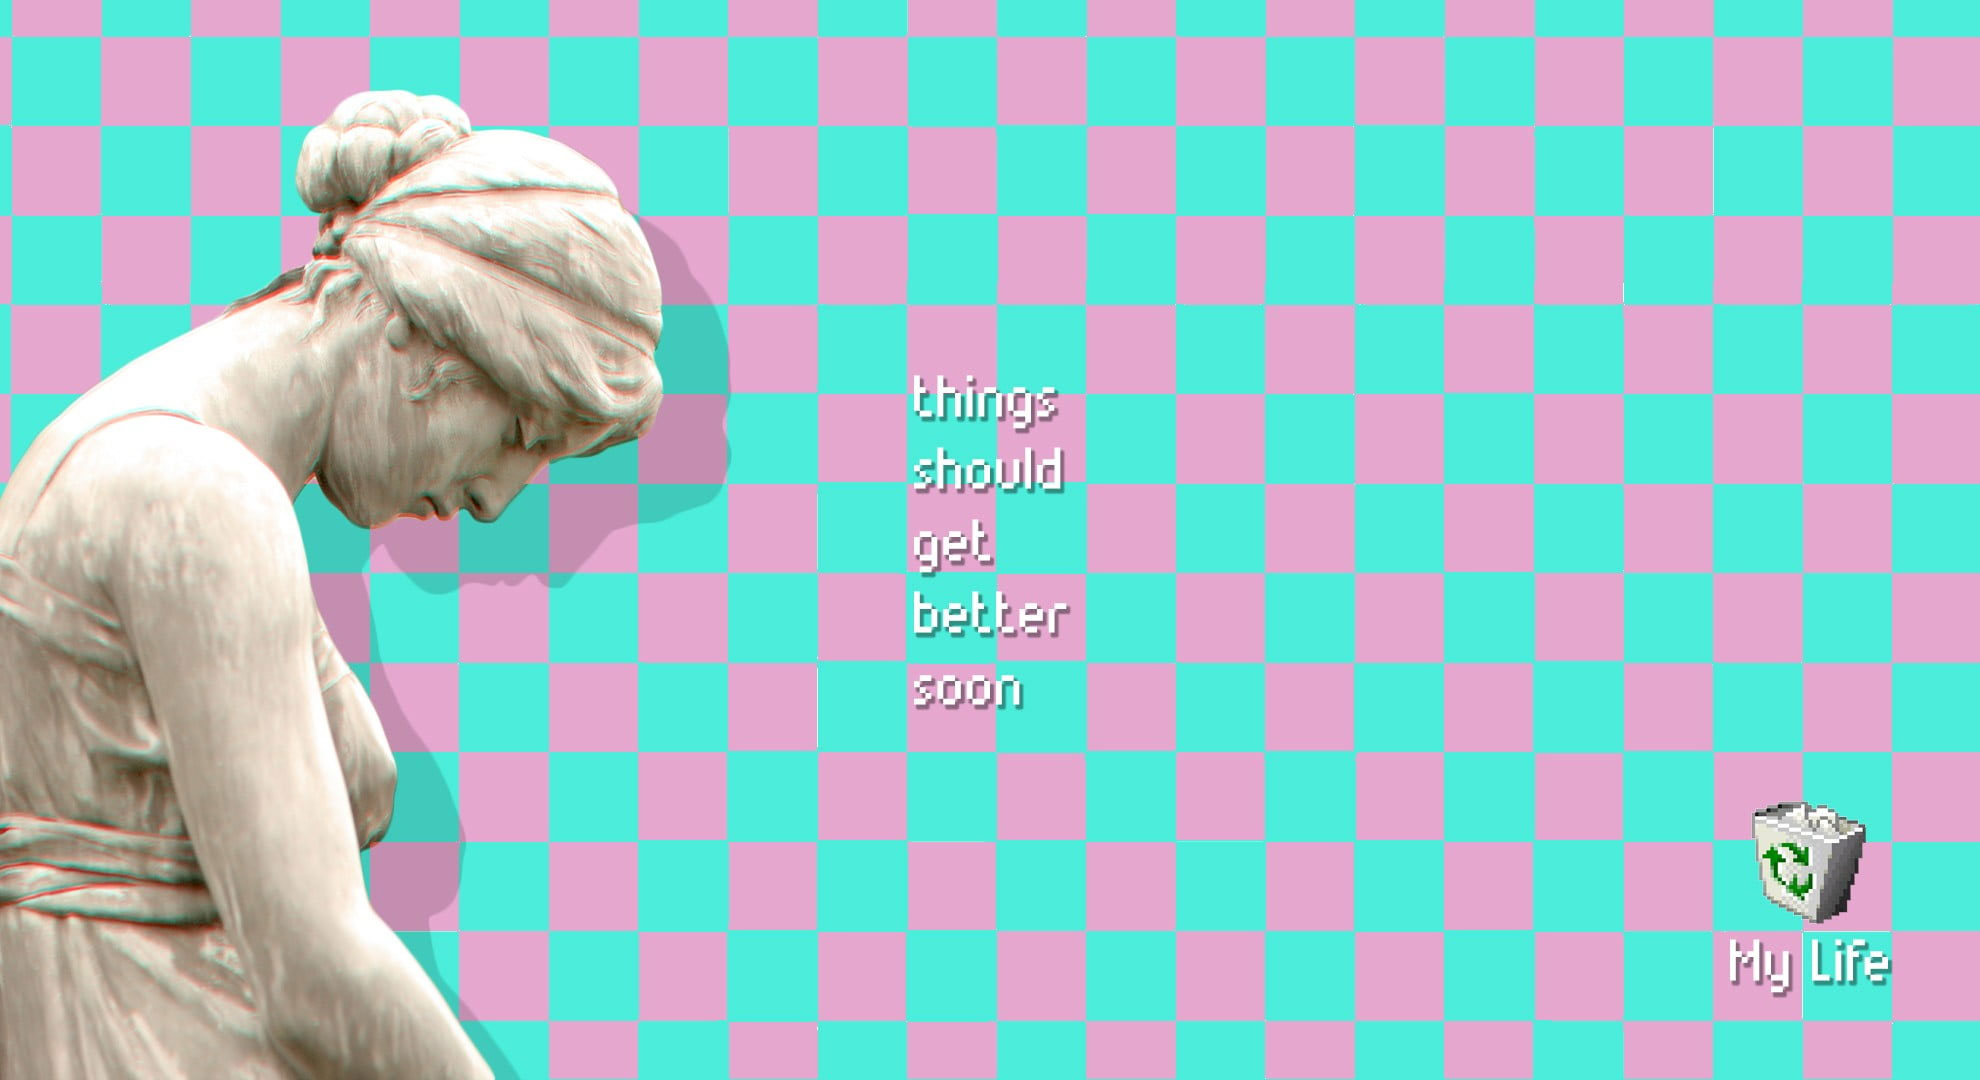 Wallpaper Things Should Get Better Soon Quote, Vaporwave